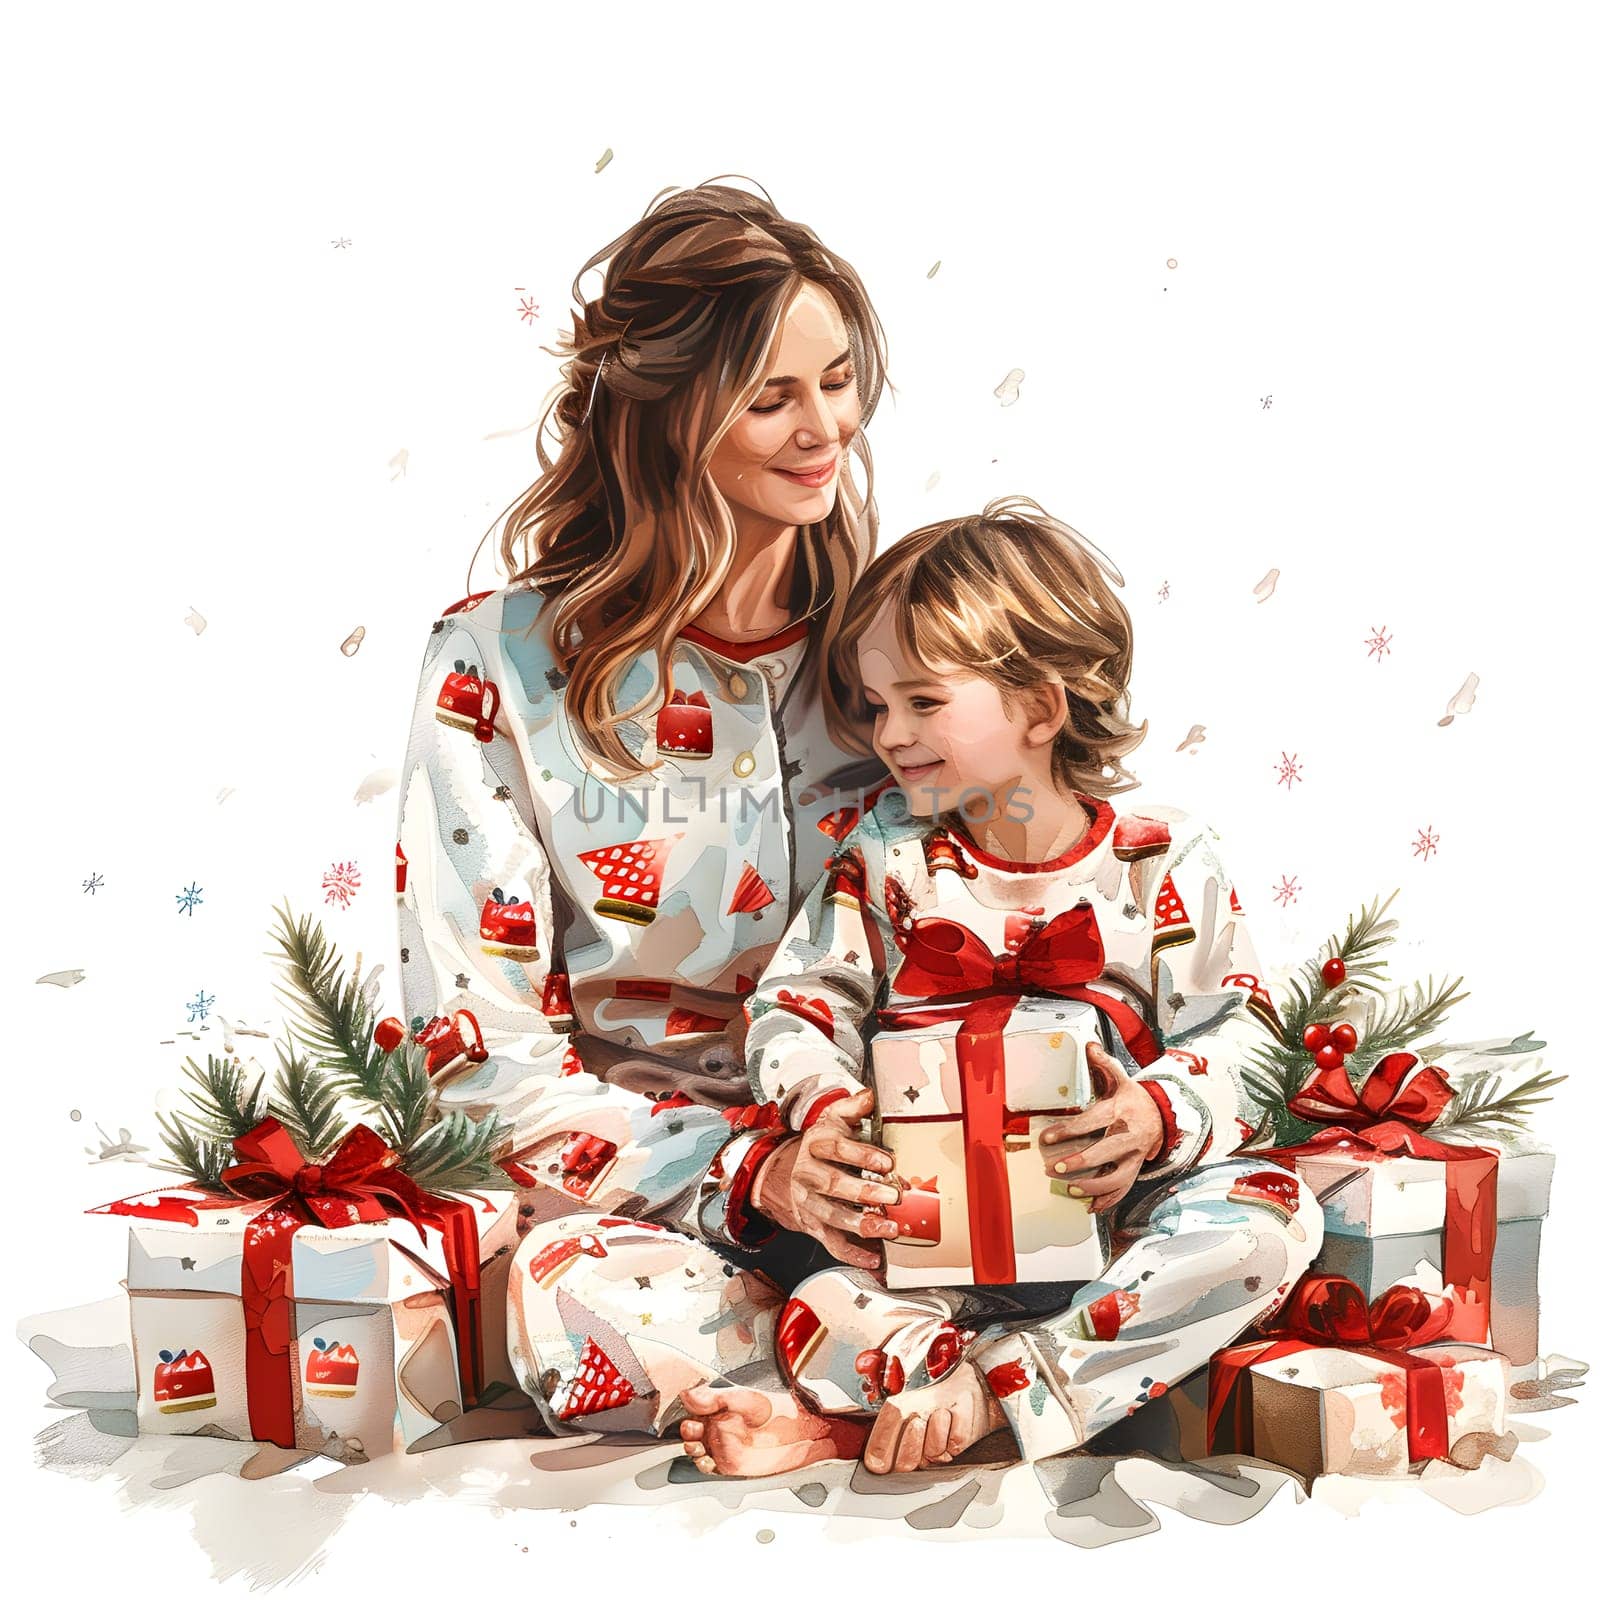 A woman and child sitting happily on the ground, holding Christmas presents by Nadtochiy